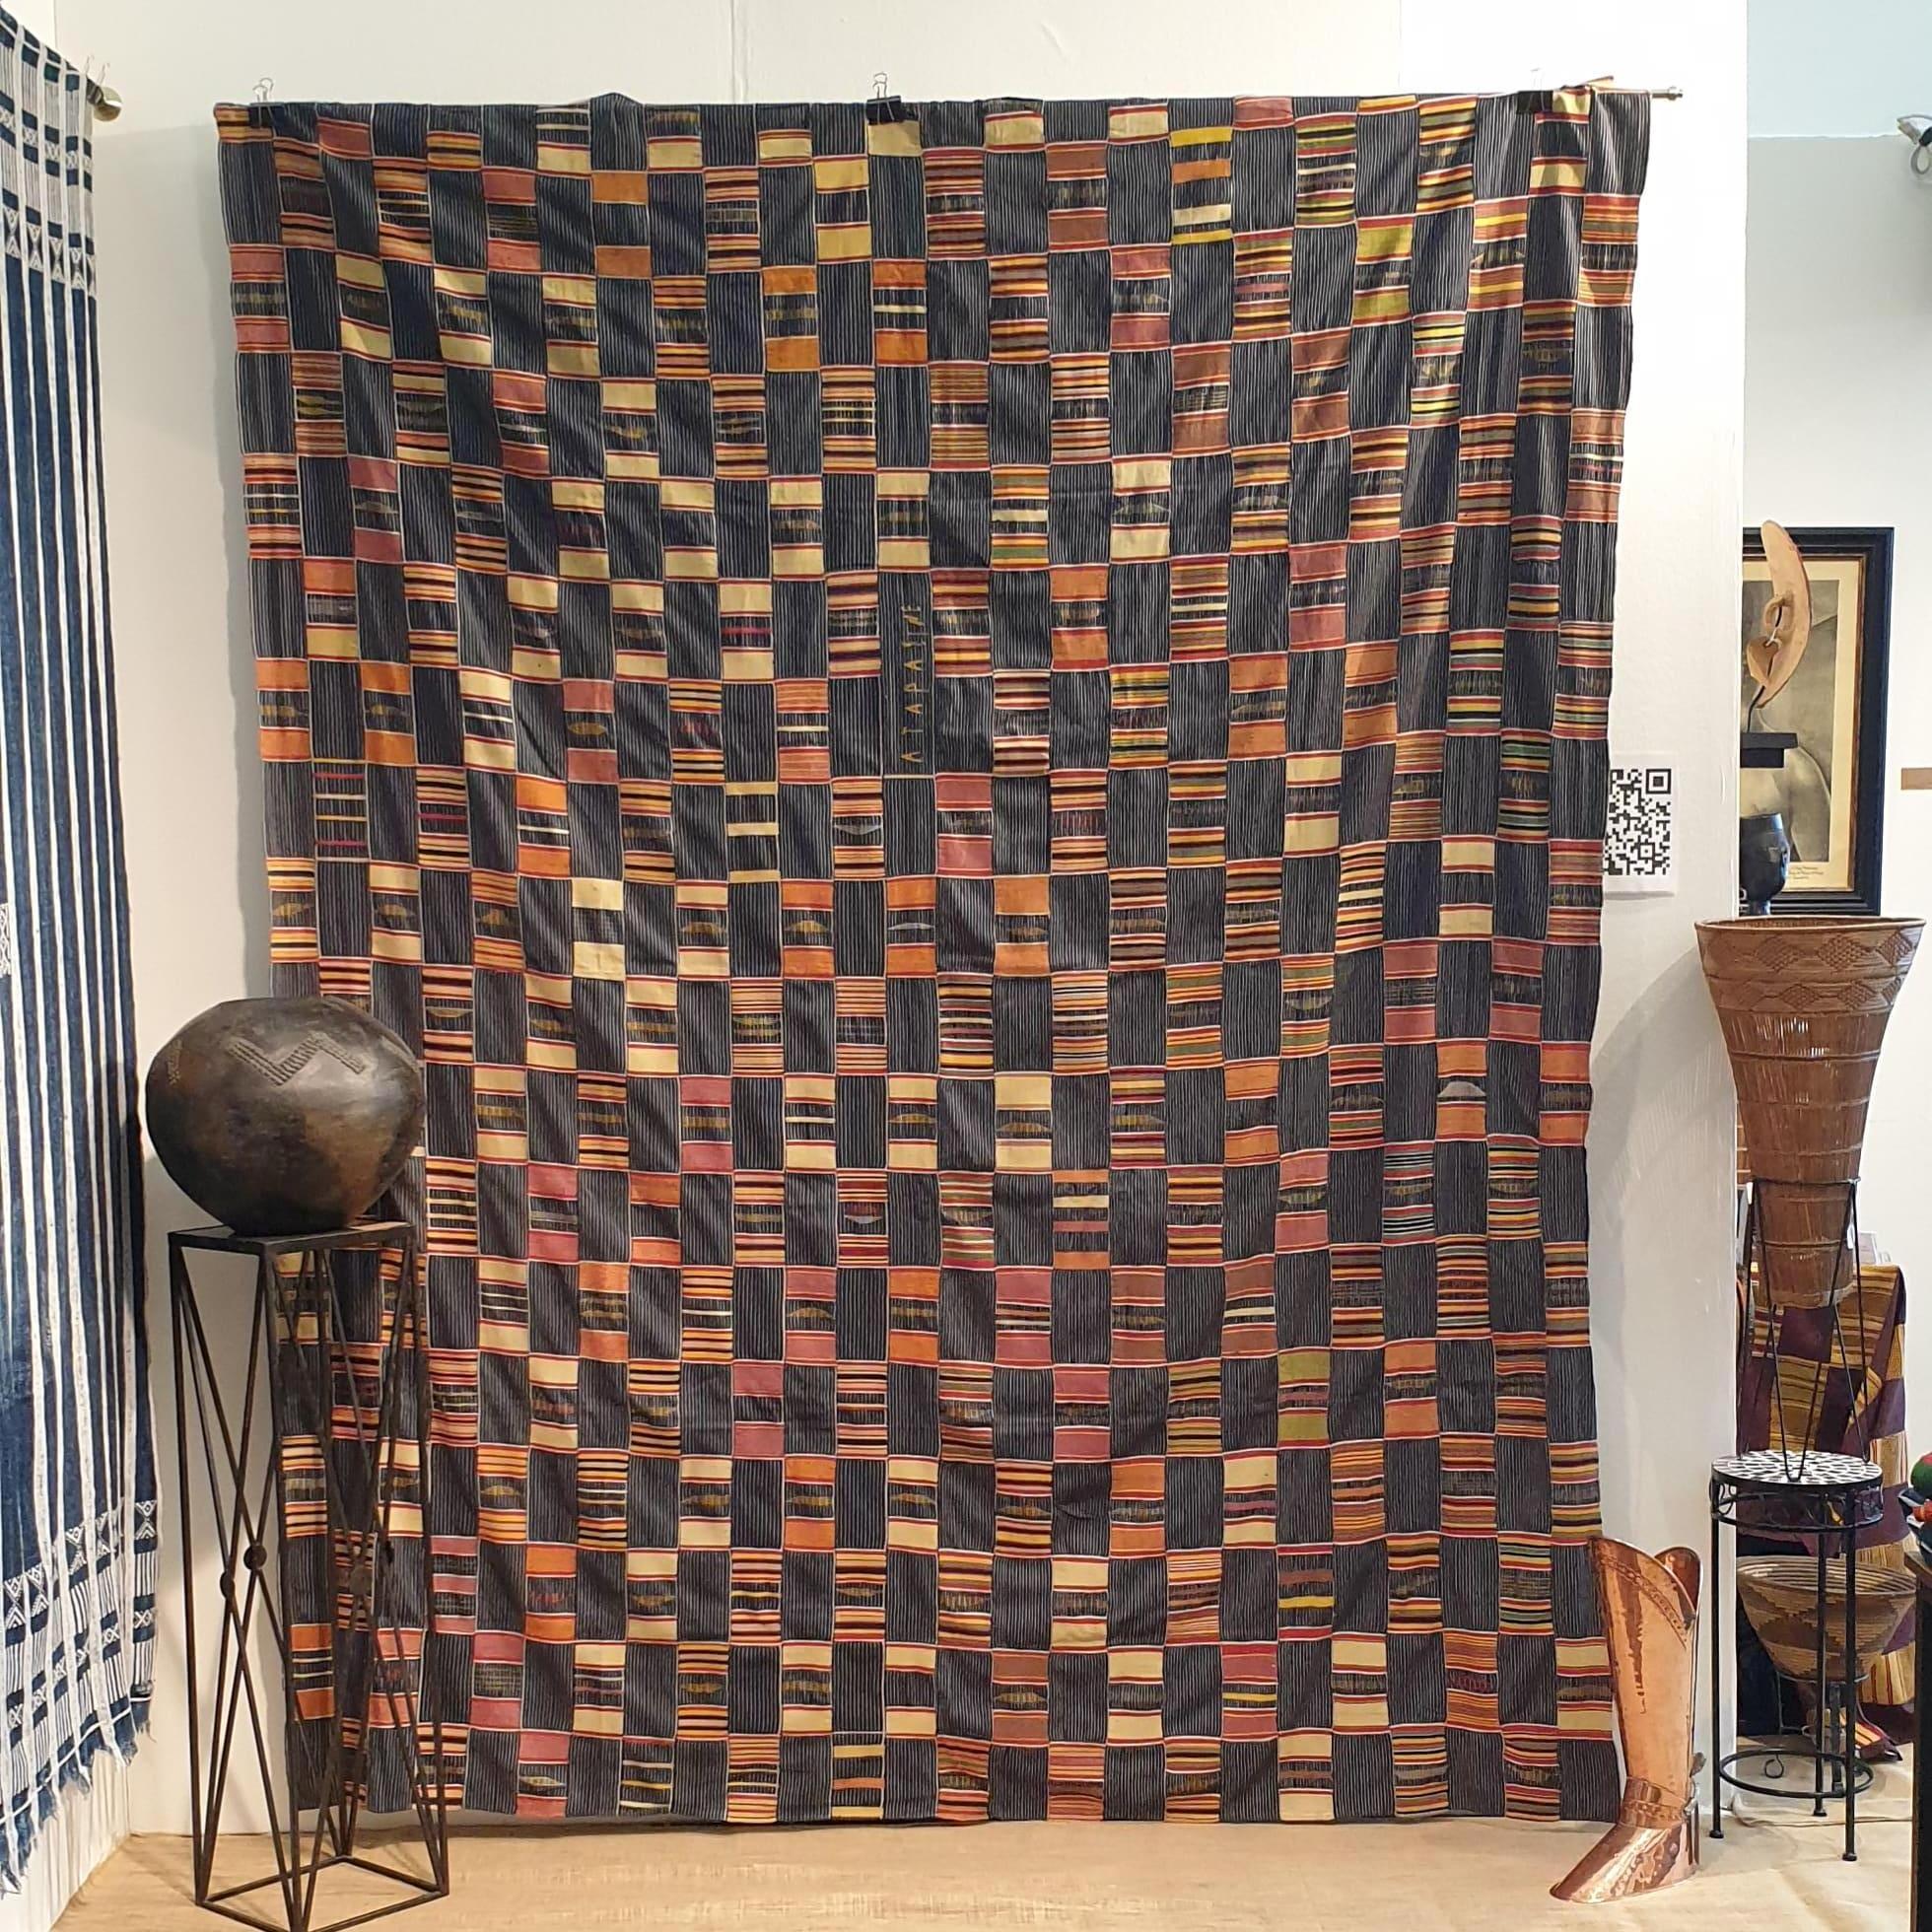 This is a fine piecevof Kente Textile from the Ewe people of the Volta region of Ghana. Woven from handspun cotton and natural dyes. This is a prestige cloth worn by a high ranking Elder of the Ewe people. The pattern denotes the individuals high